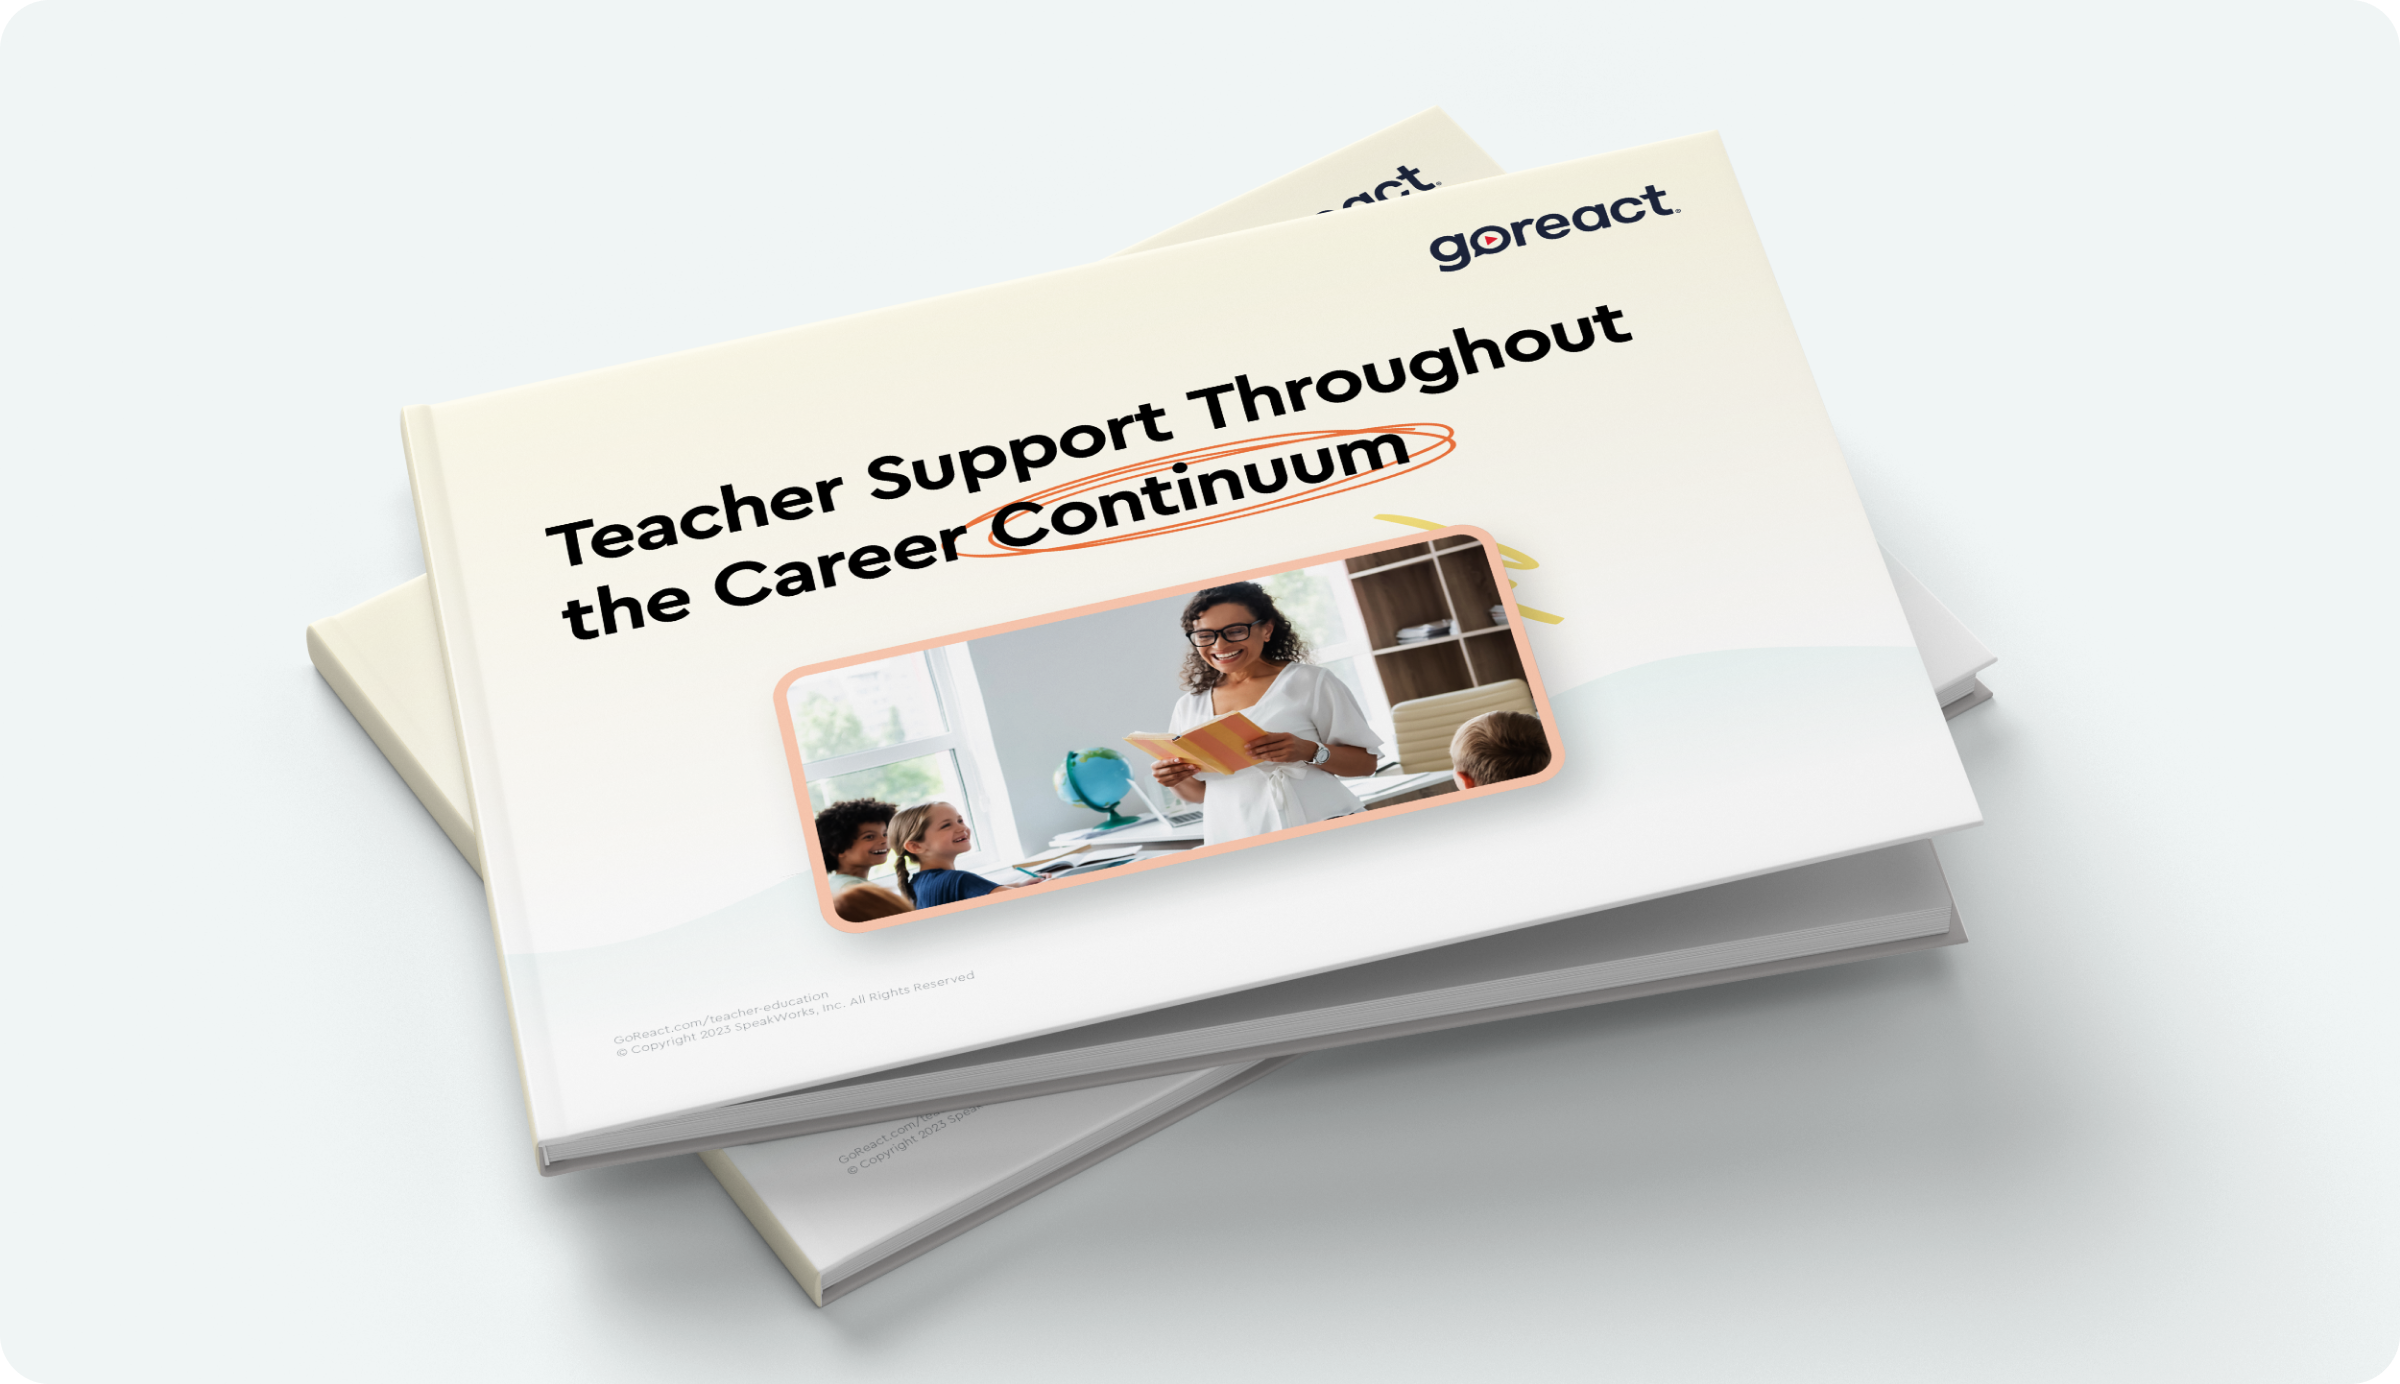 Teacher Support Throughout the Career Continuum